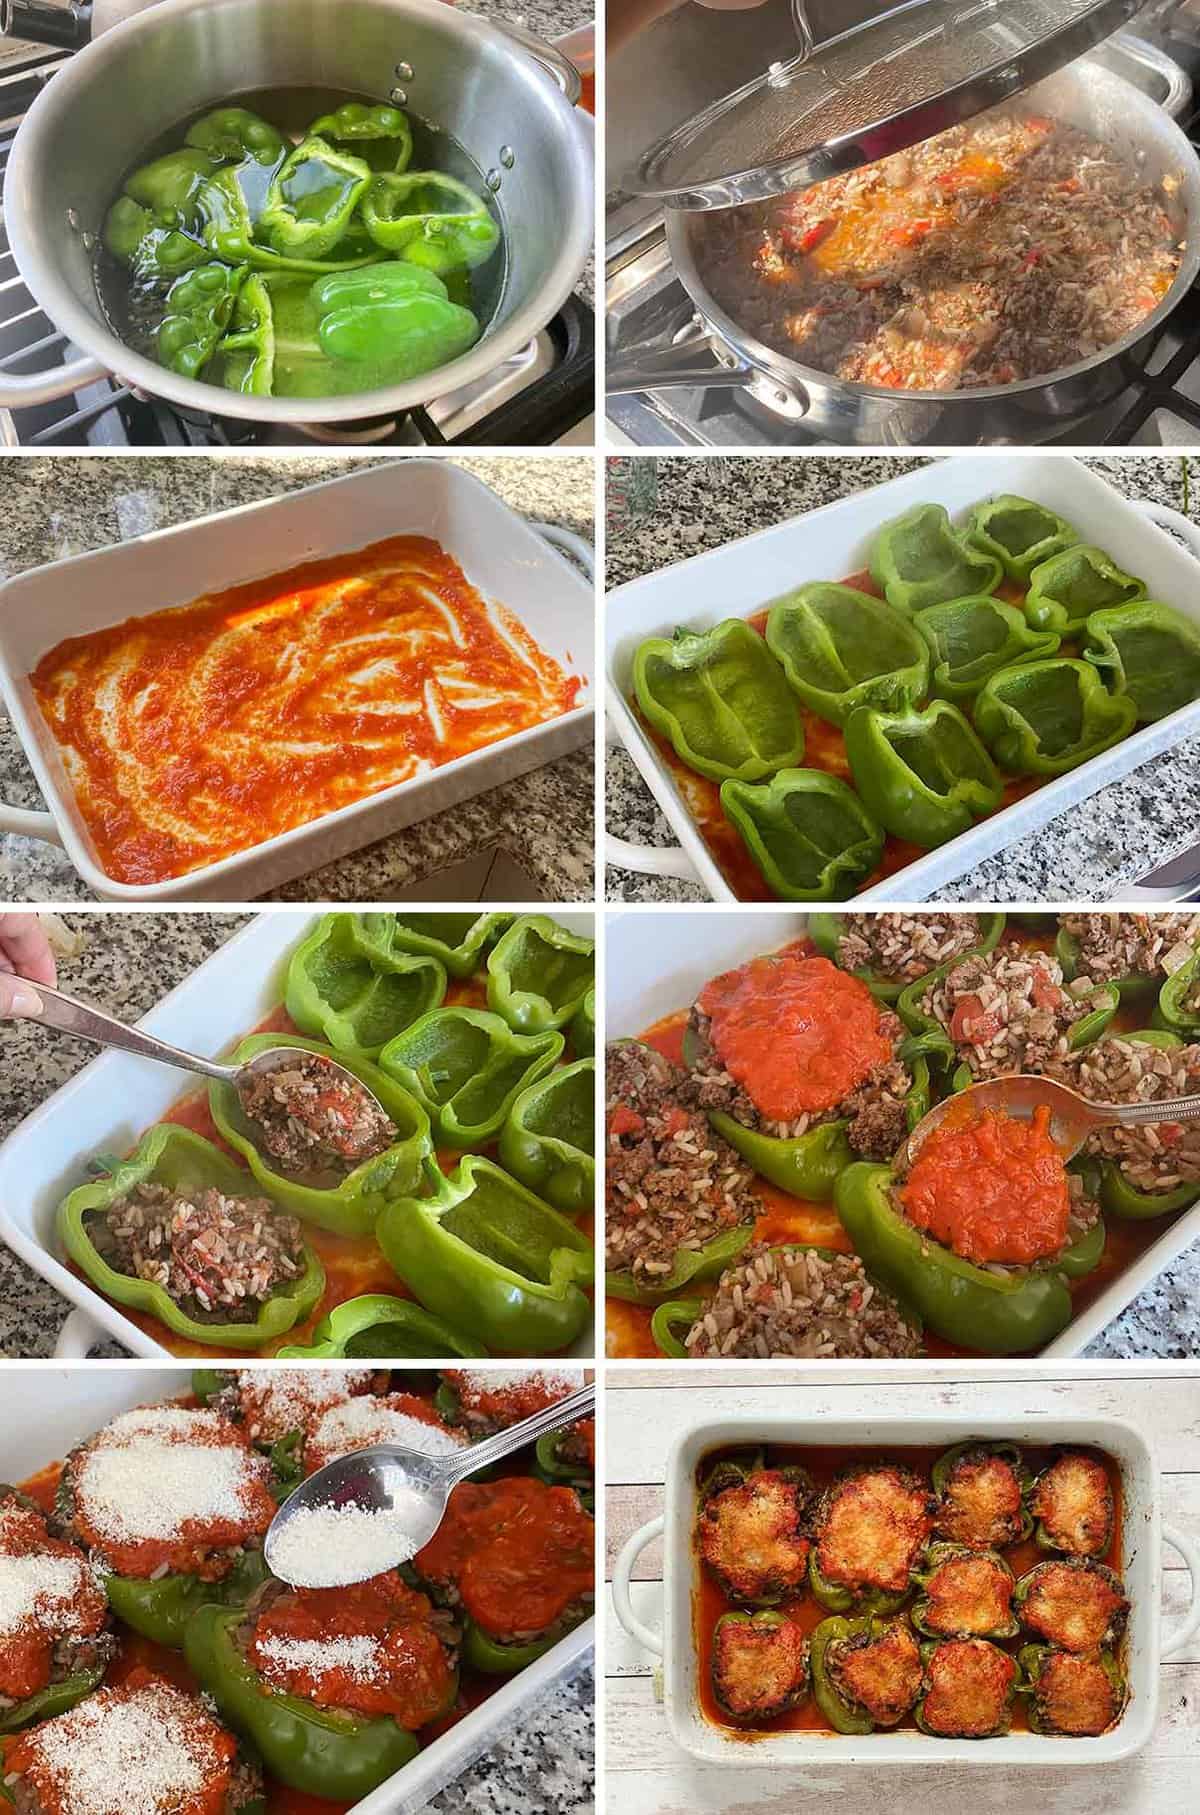 Process collage showing blanching peppers and stuffing them with beef and onions, baking to make stuffed peppers.